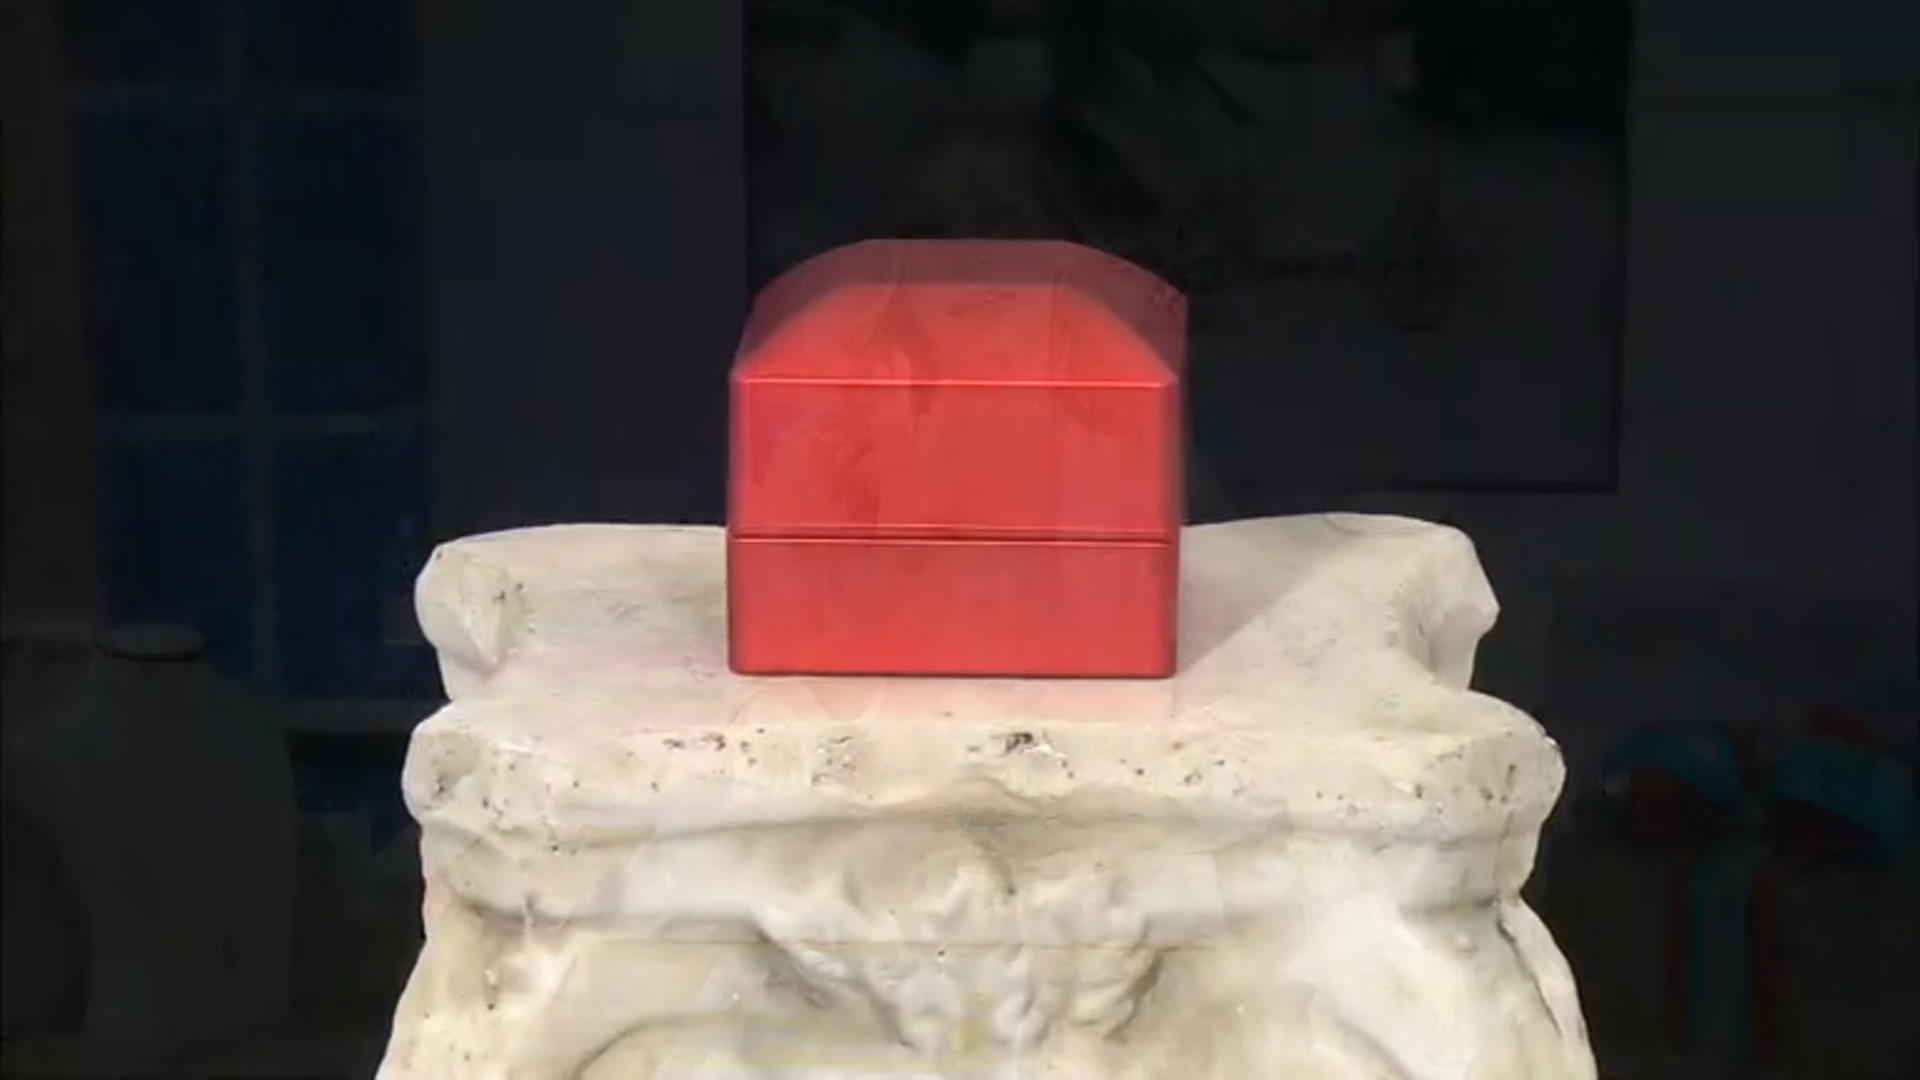 Red Color Ring Box with Led Light appx 6.5x6x4.8cm Video Thumbnail